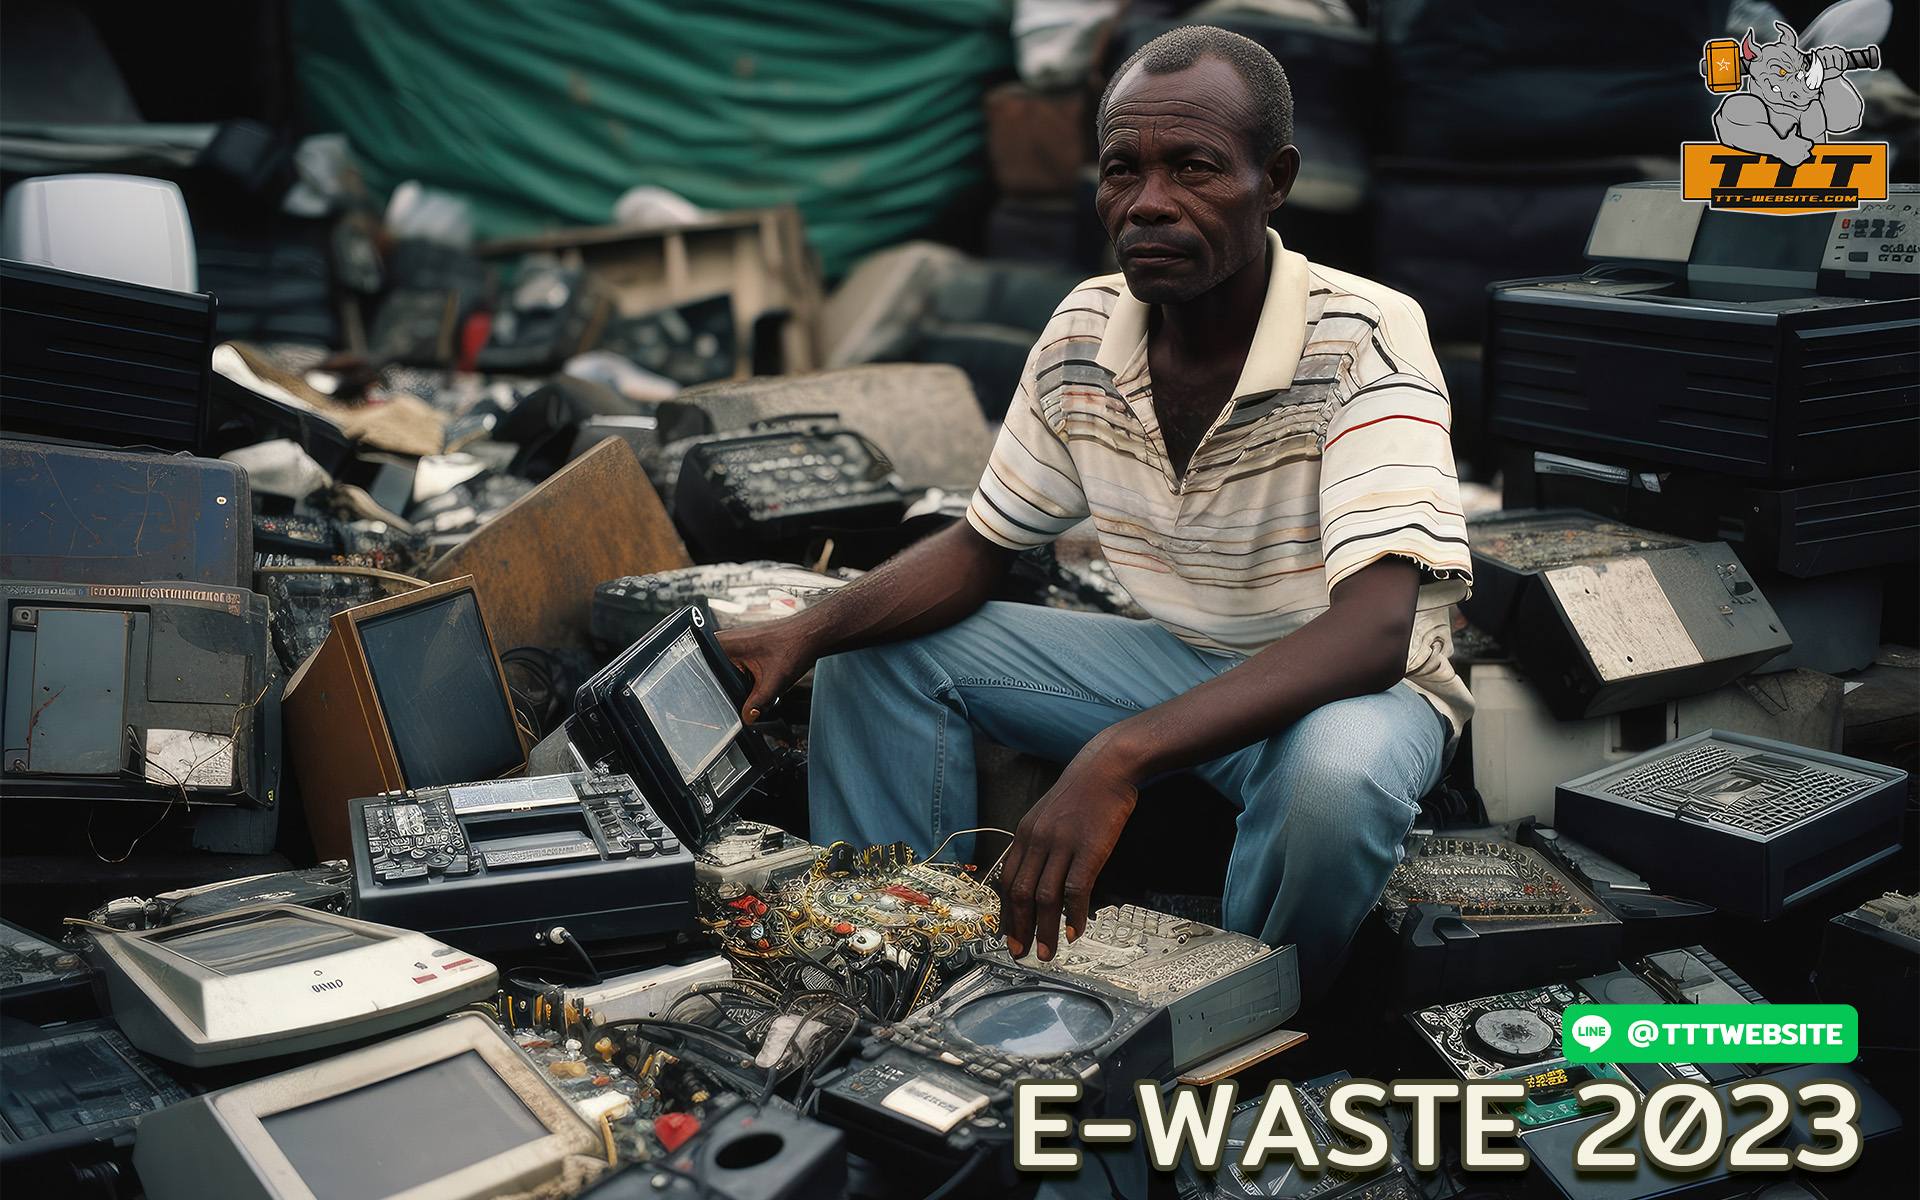 Electronic waste in 2023